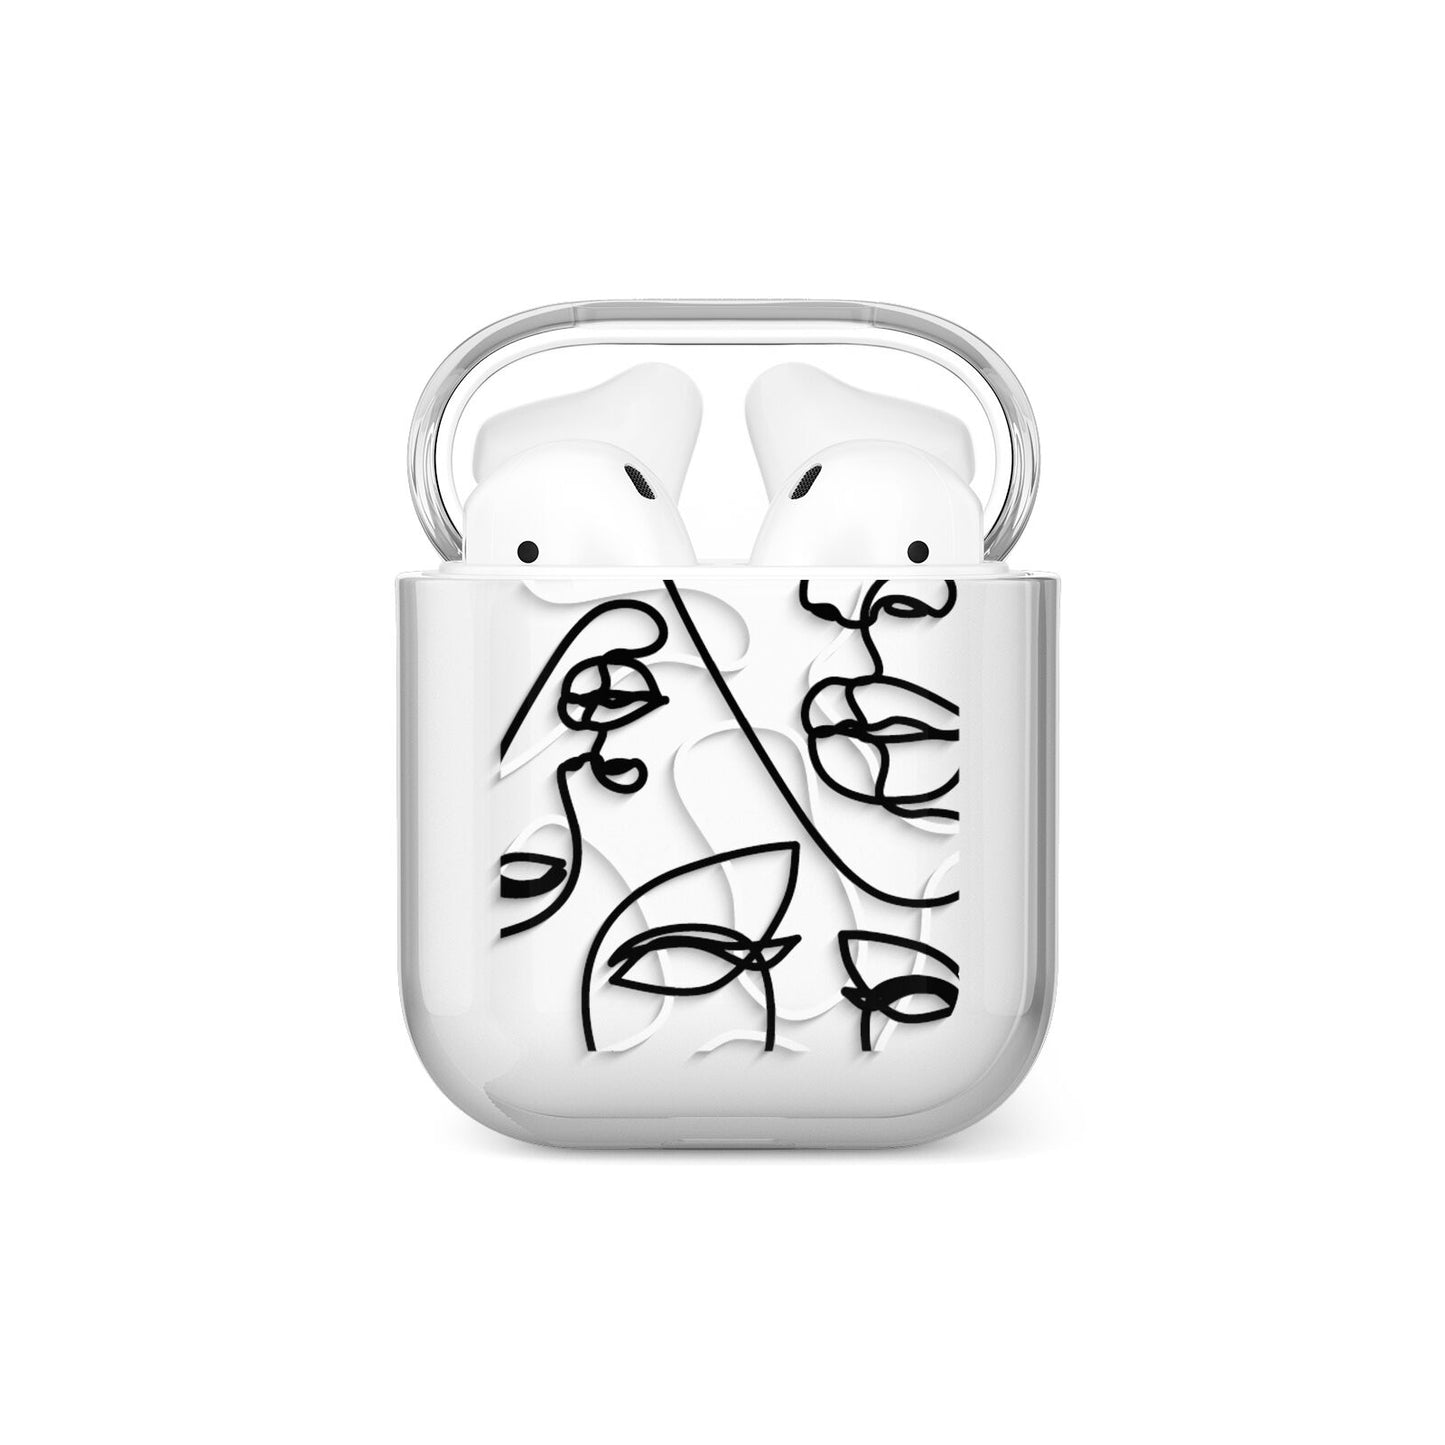 Abstract Face AirPods Case